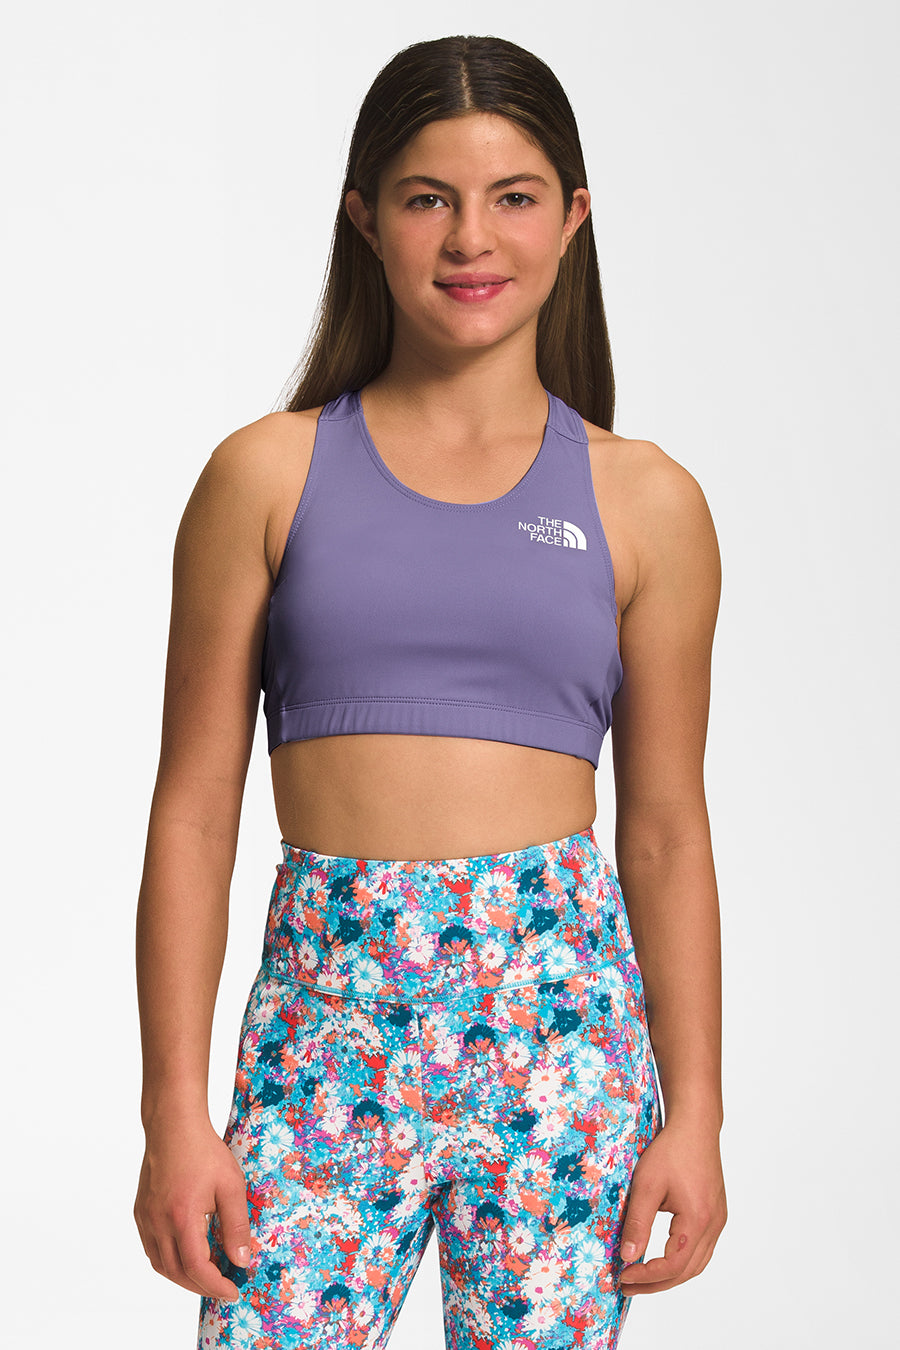 Girls Sports Bra North Face Deep Periwinkle